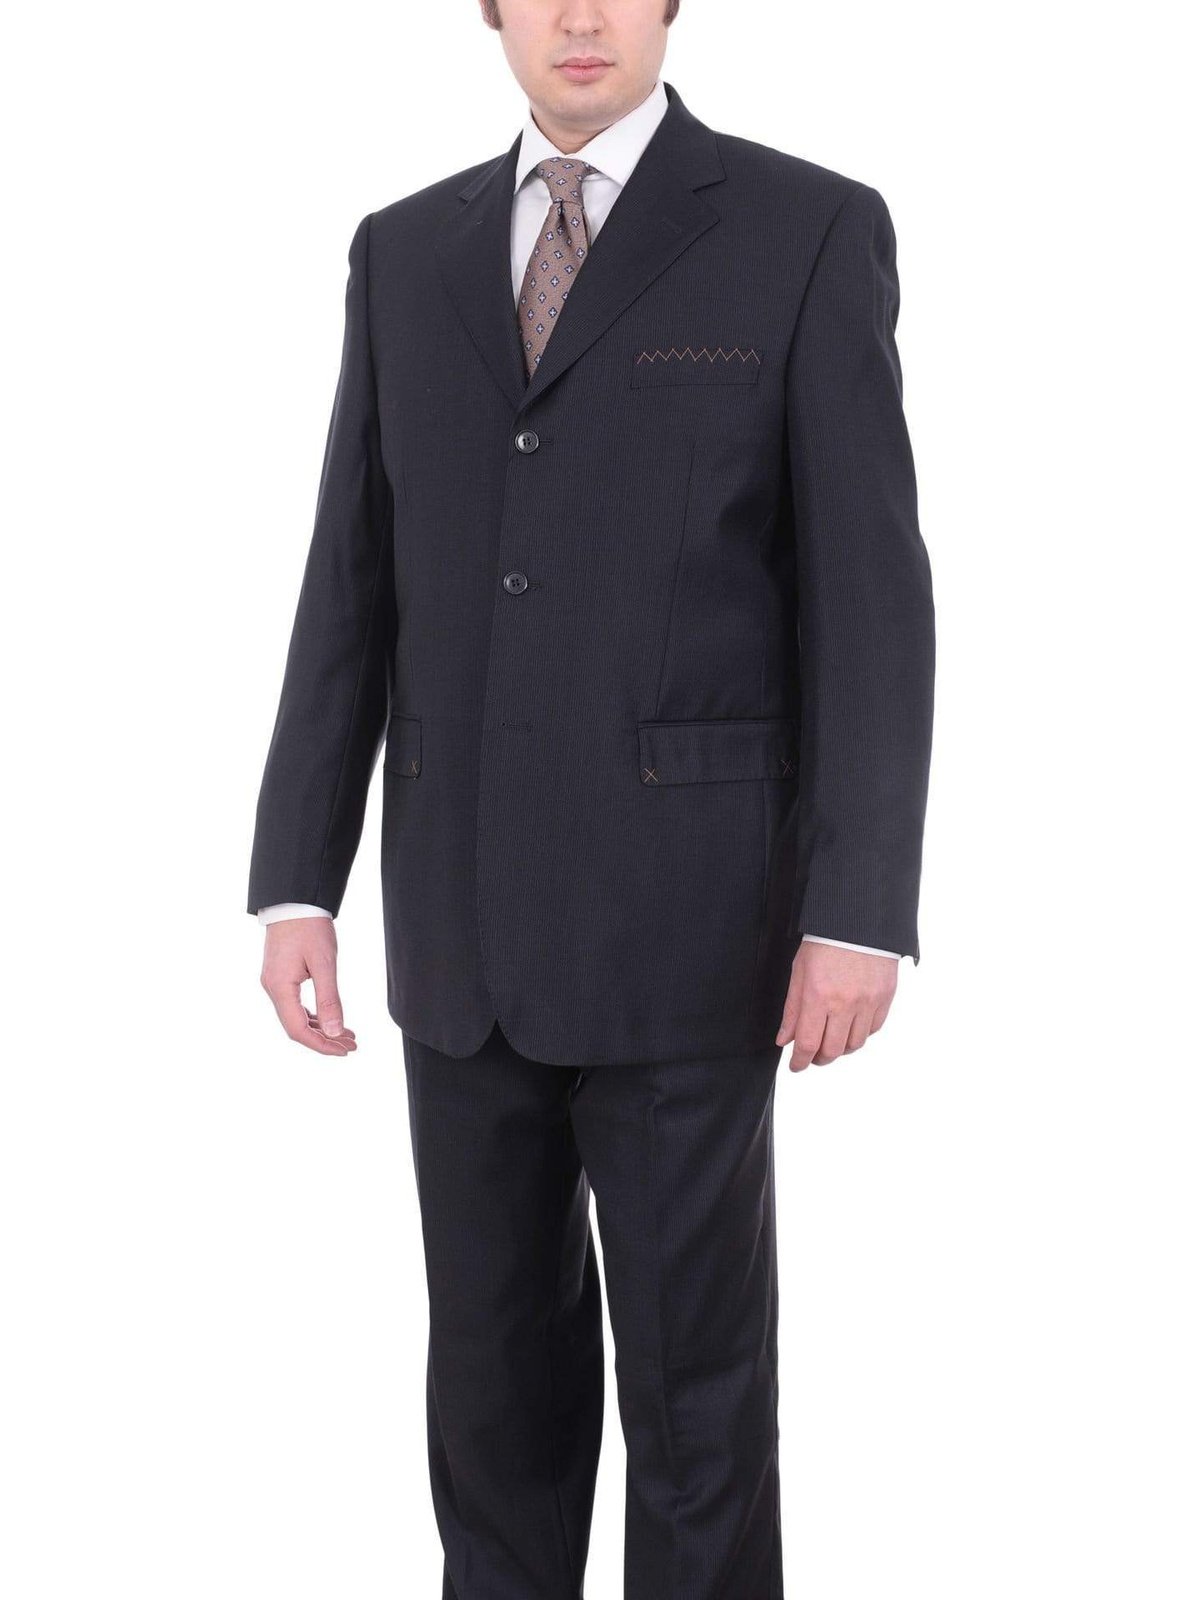 Carlo Palazzi Sale Suits 42R Mens Italy Classic Fit Navy Blue 3 Button Pleated 100% Wool Suit